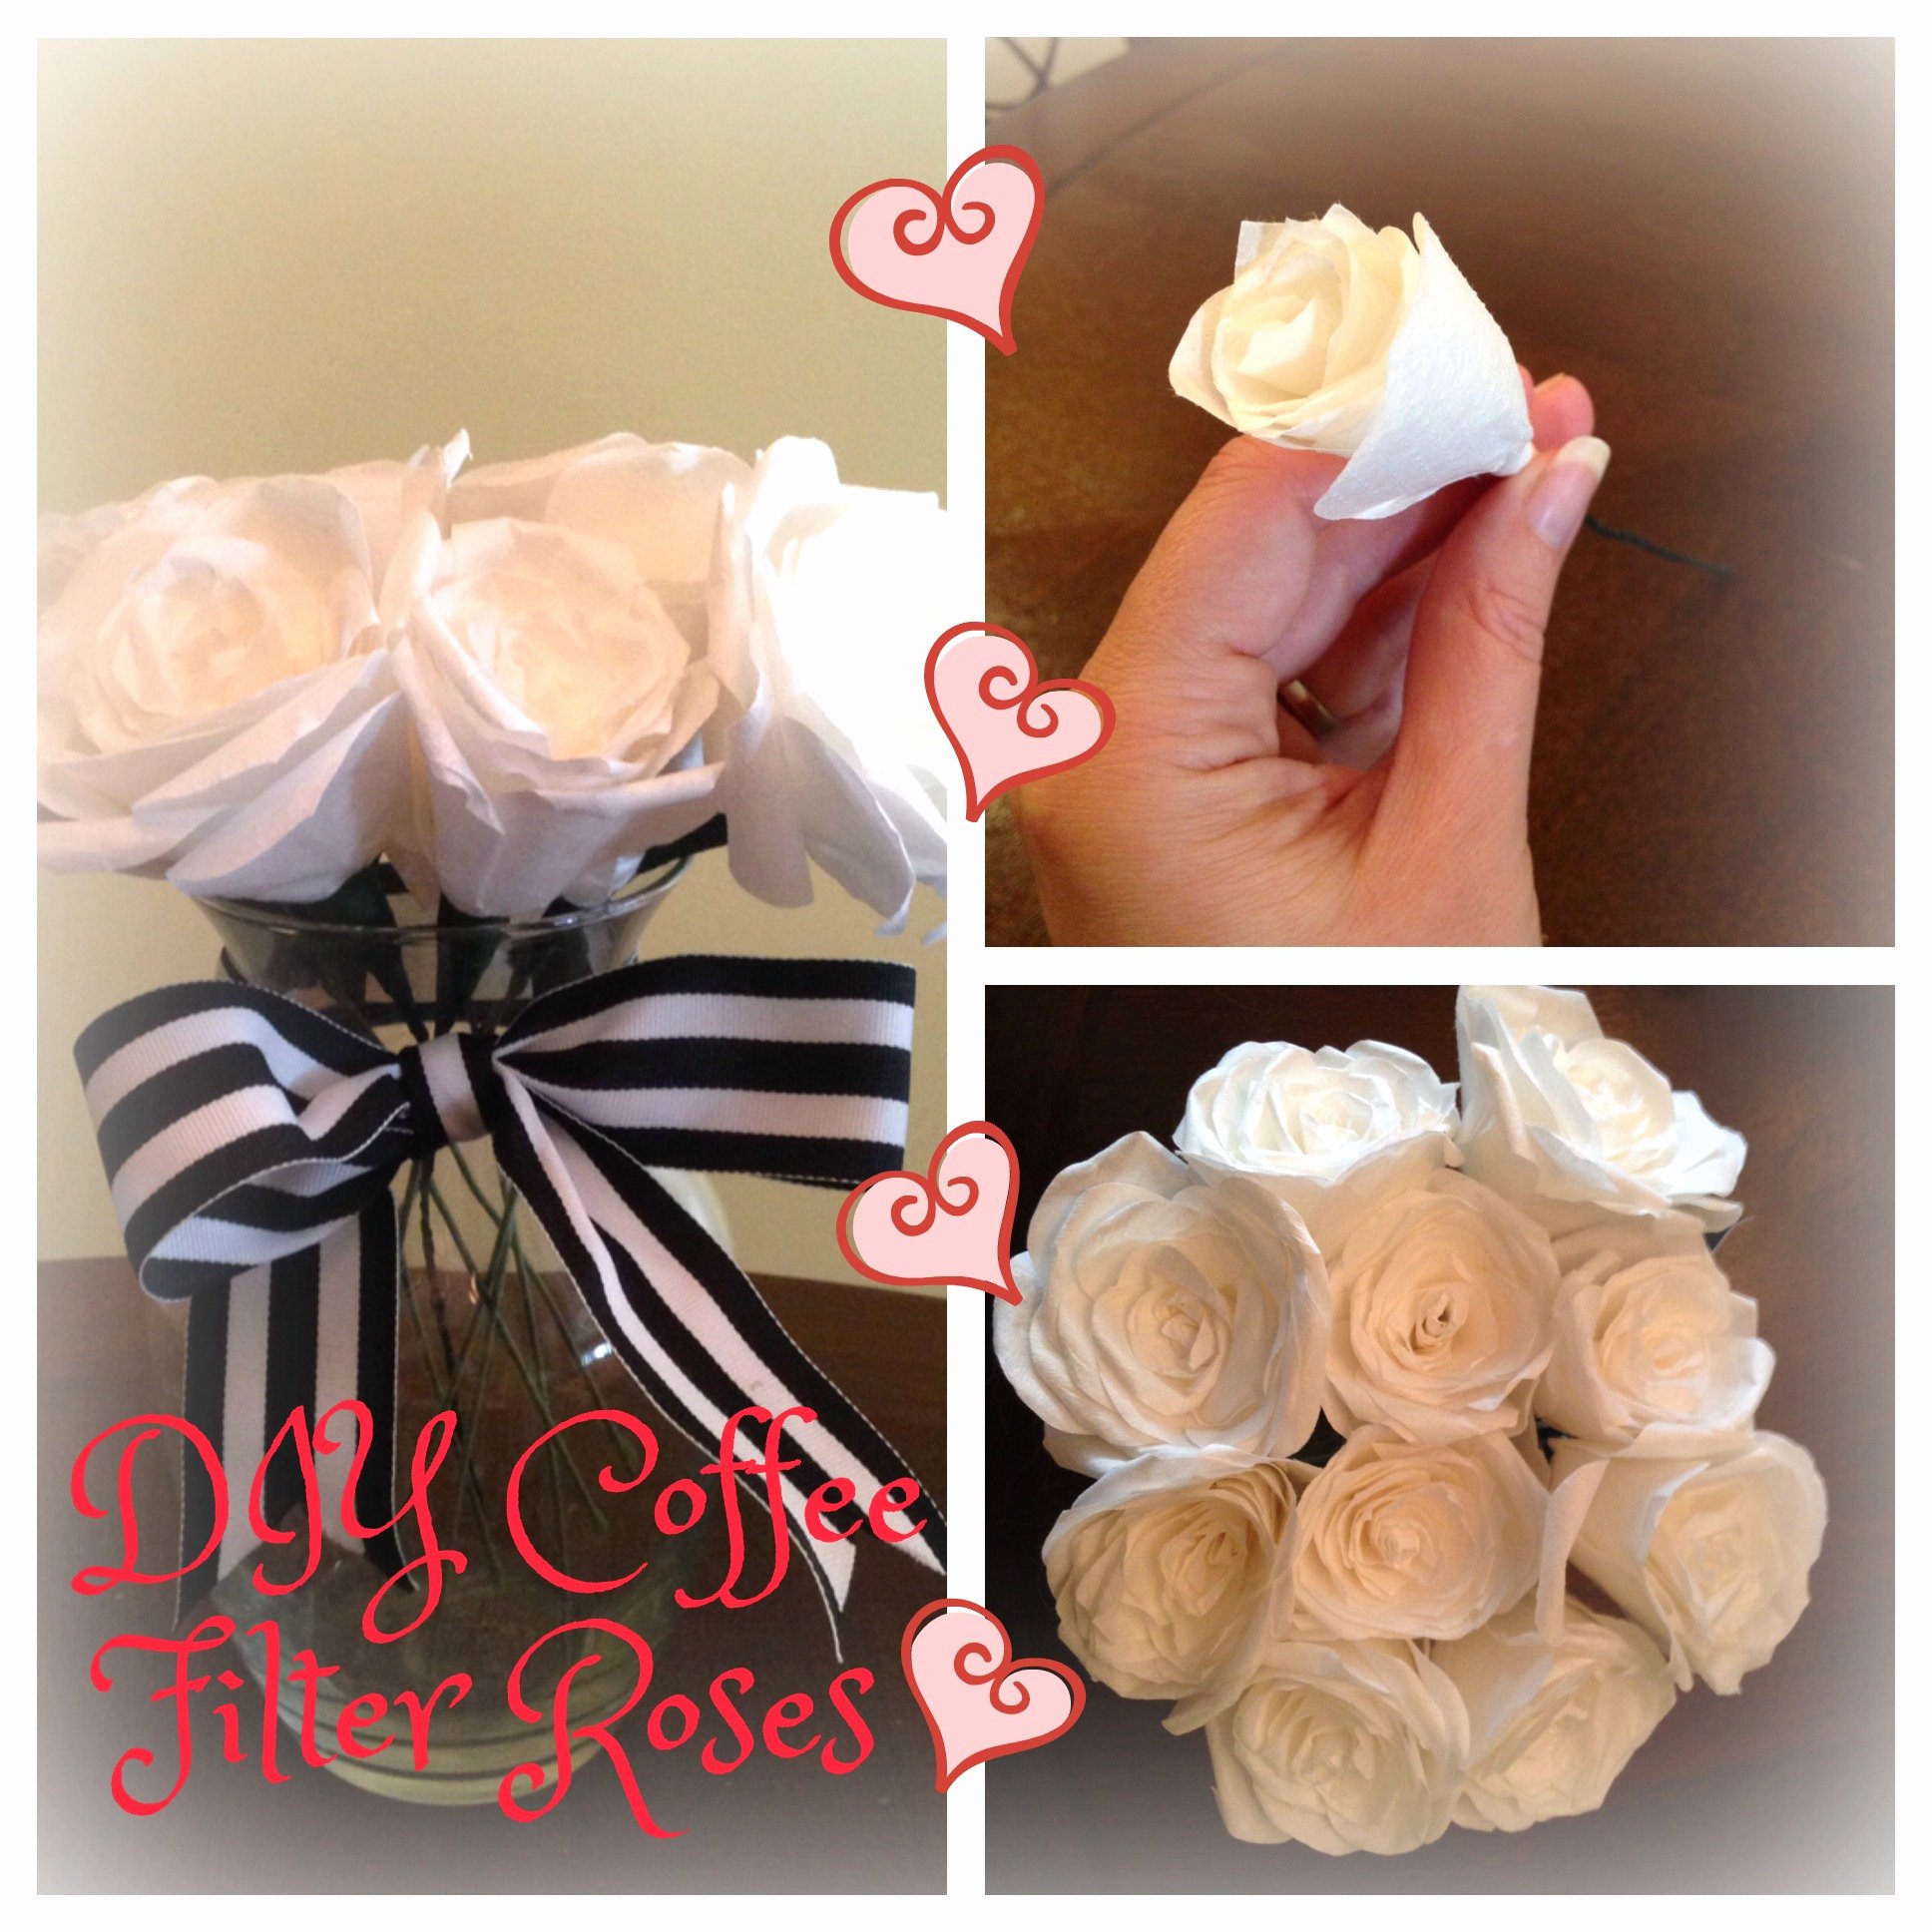 Coffee Filter Roses Template Unique Diy Coffee Filter Roses Becker It Yourself